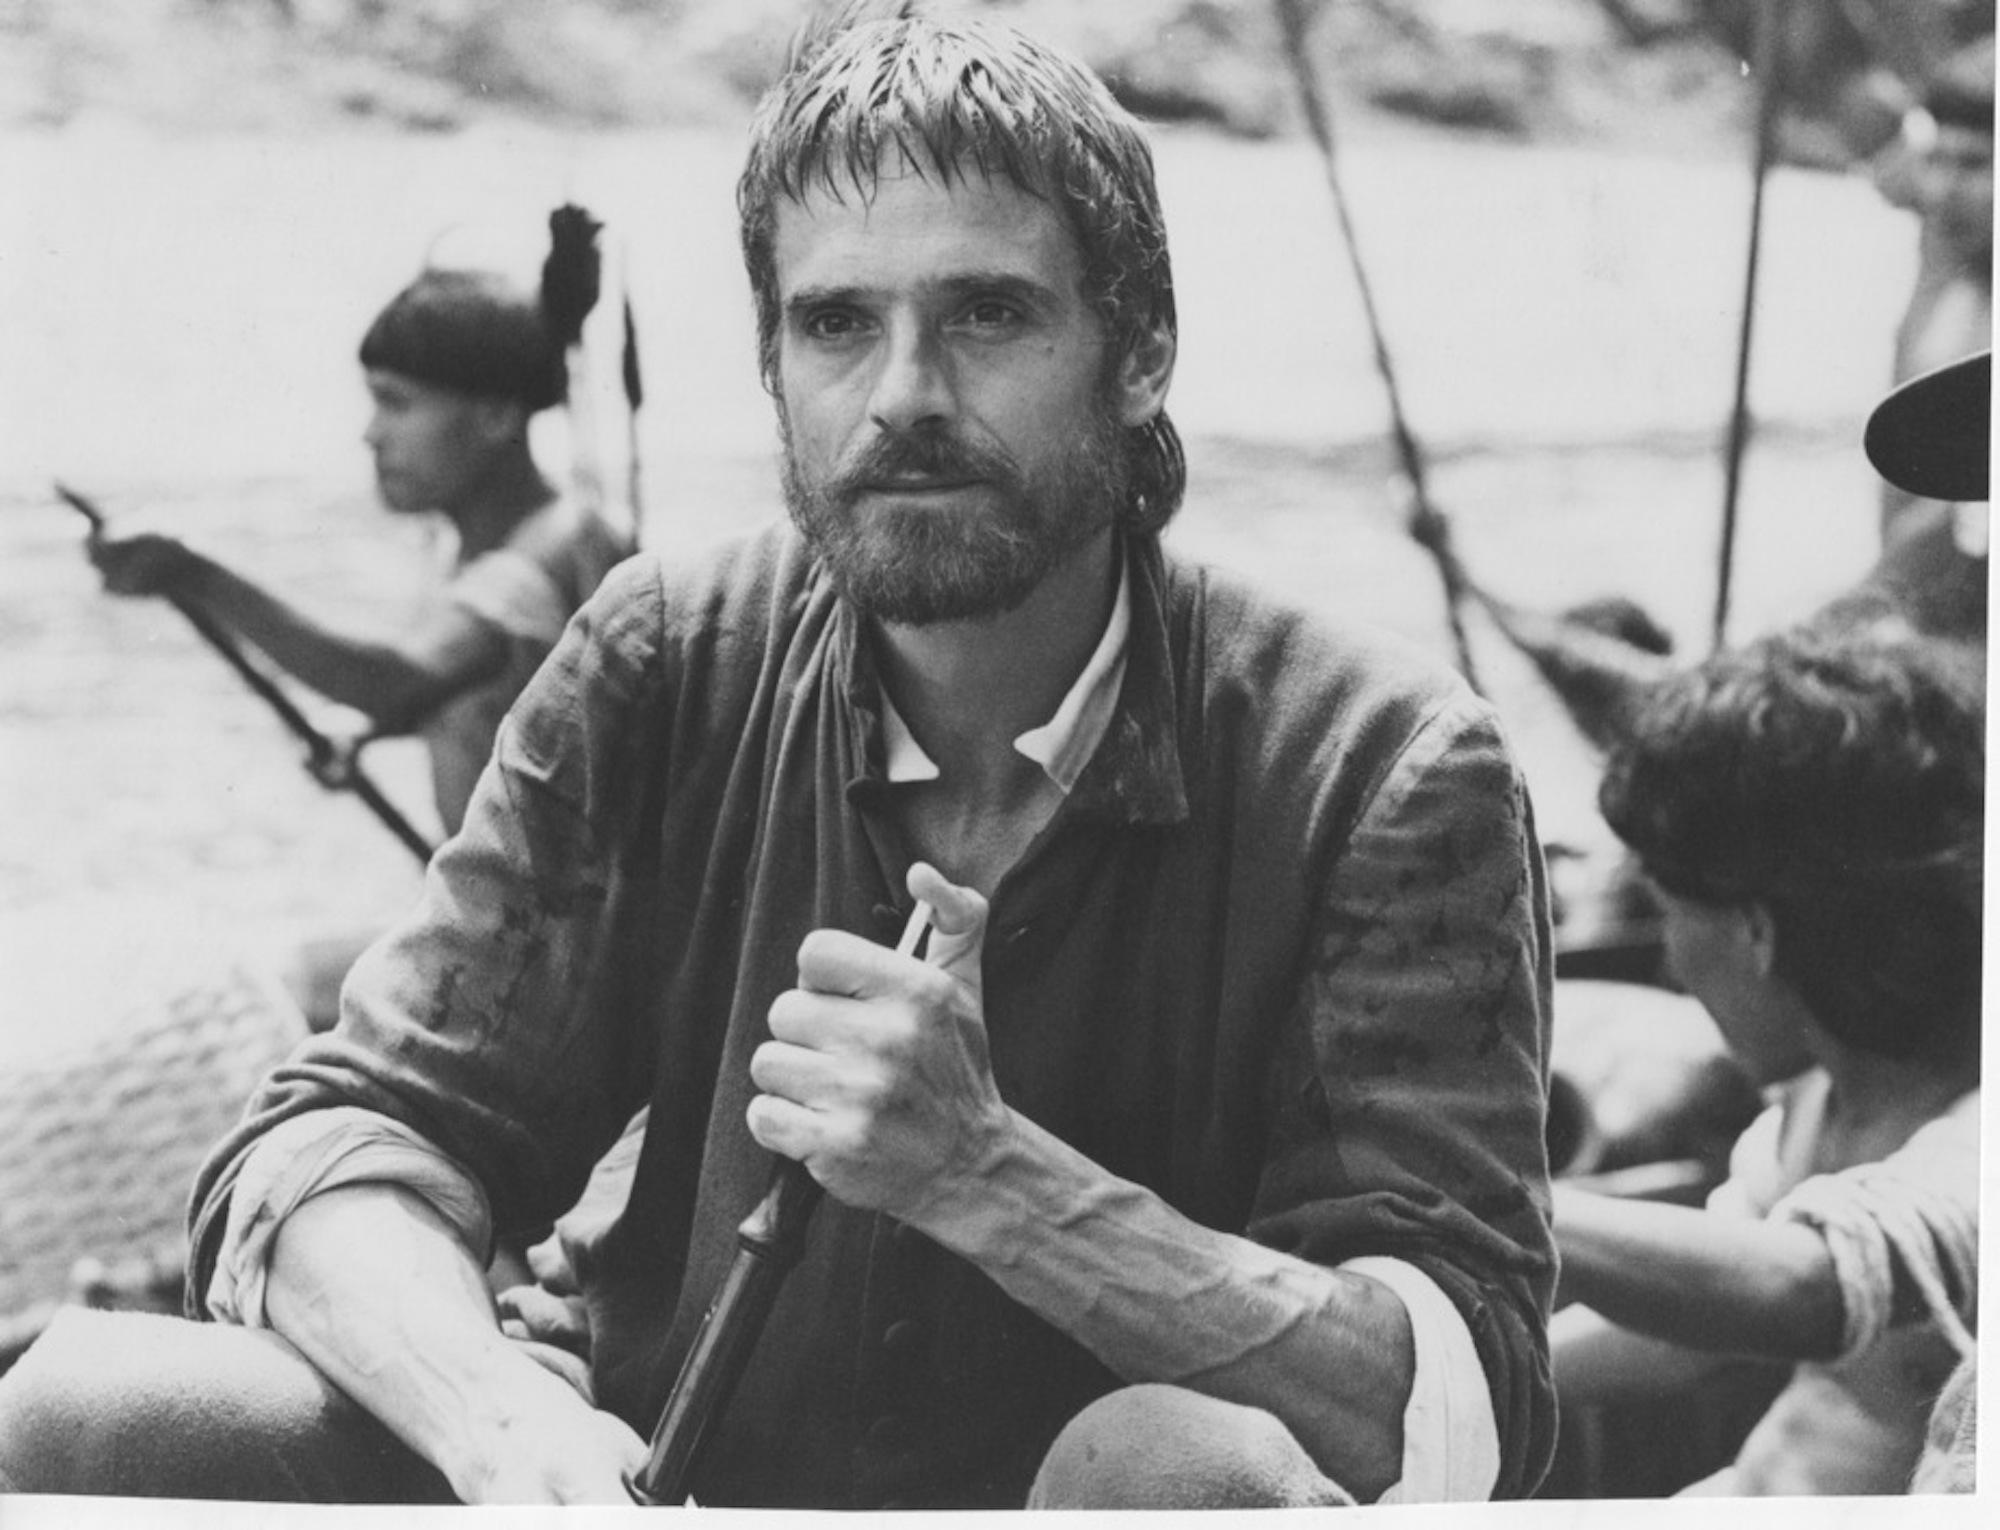 Unknown Portrait Photograph - Jeremy Irons on the set of "The Mission" - Vintage Photo - 1986